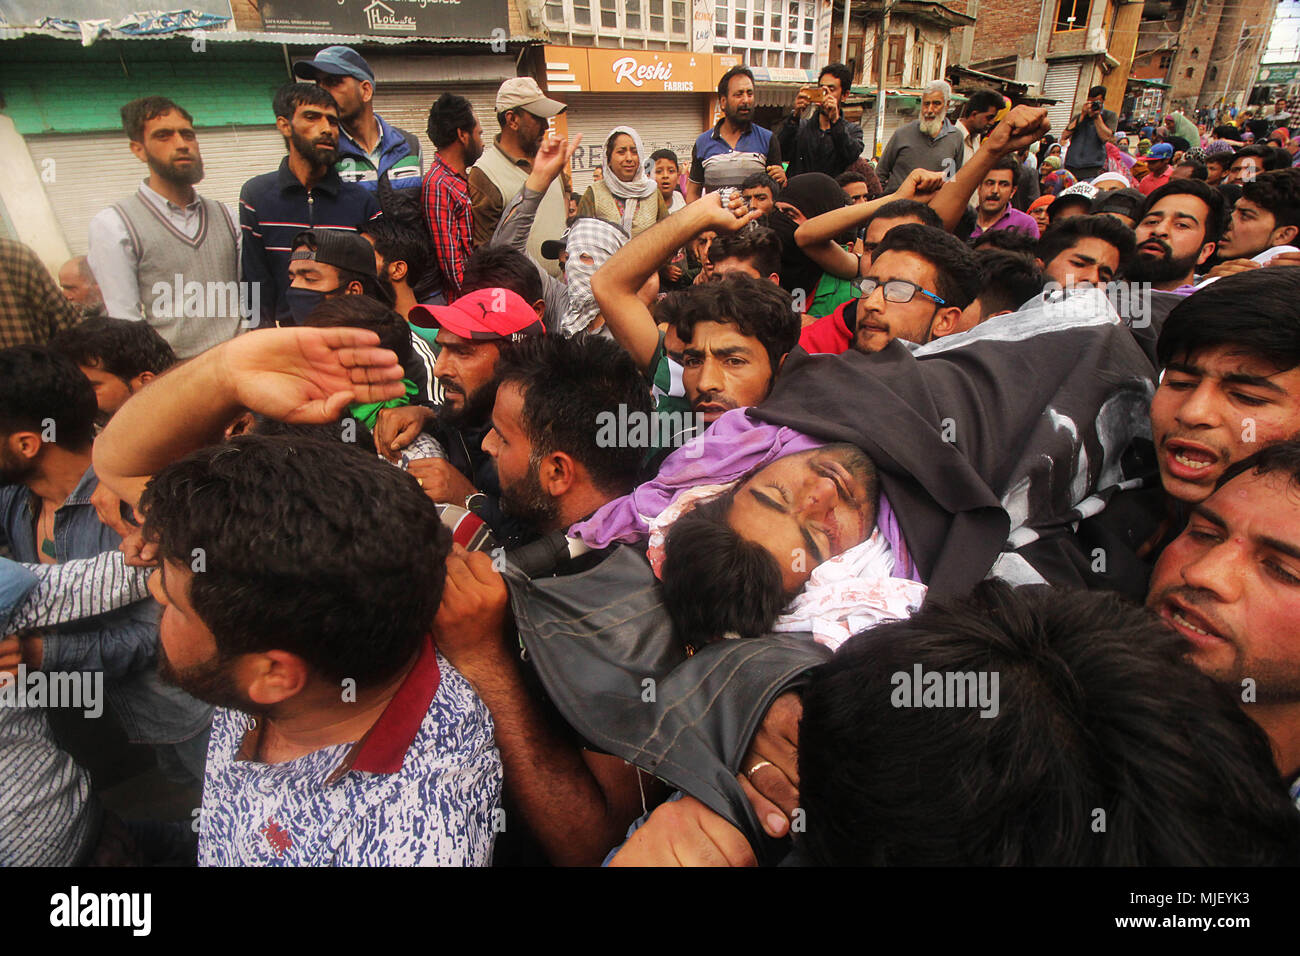 May 5, 2018 - Srinagar, Jammu and Kashmir, India - People carry the dead body of a protester who was ran over by police vehicle during anti-India clashes in Srinagar the summer of Indian controlled Kashmir on May 05, 2018. Four people including a protester and three rebels were killed during a gun-battle between rebels and Indian forces in Chattabal area of Srinagar. Massive clashes erupt across Srinagar after the news about the trapping of rebels and killing of protester spread across the city. Police fired teargas canisters, pellets, stun grenades and rubber coated bullets to disperse the an Stock Photo